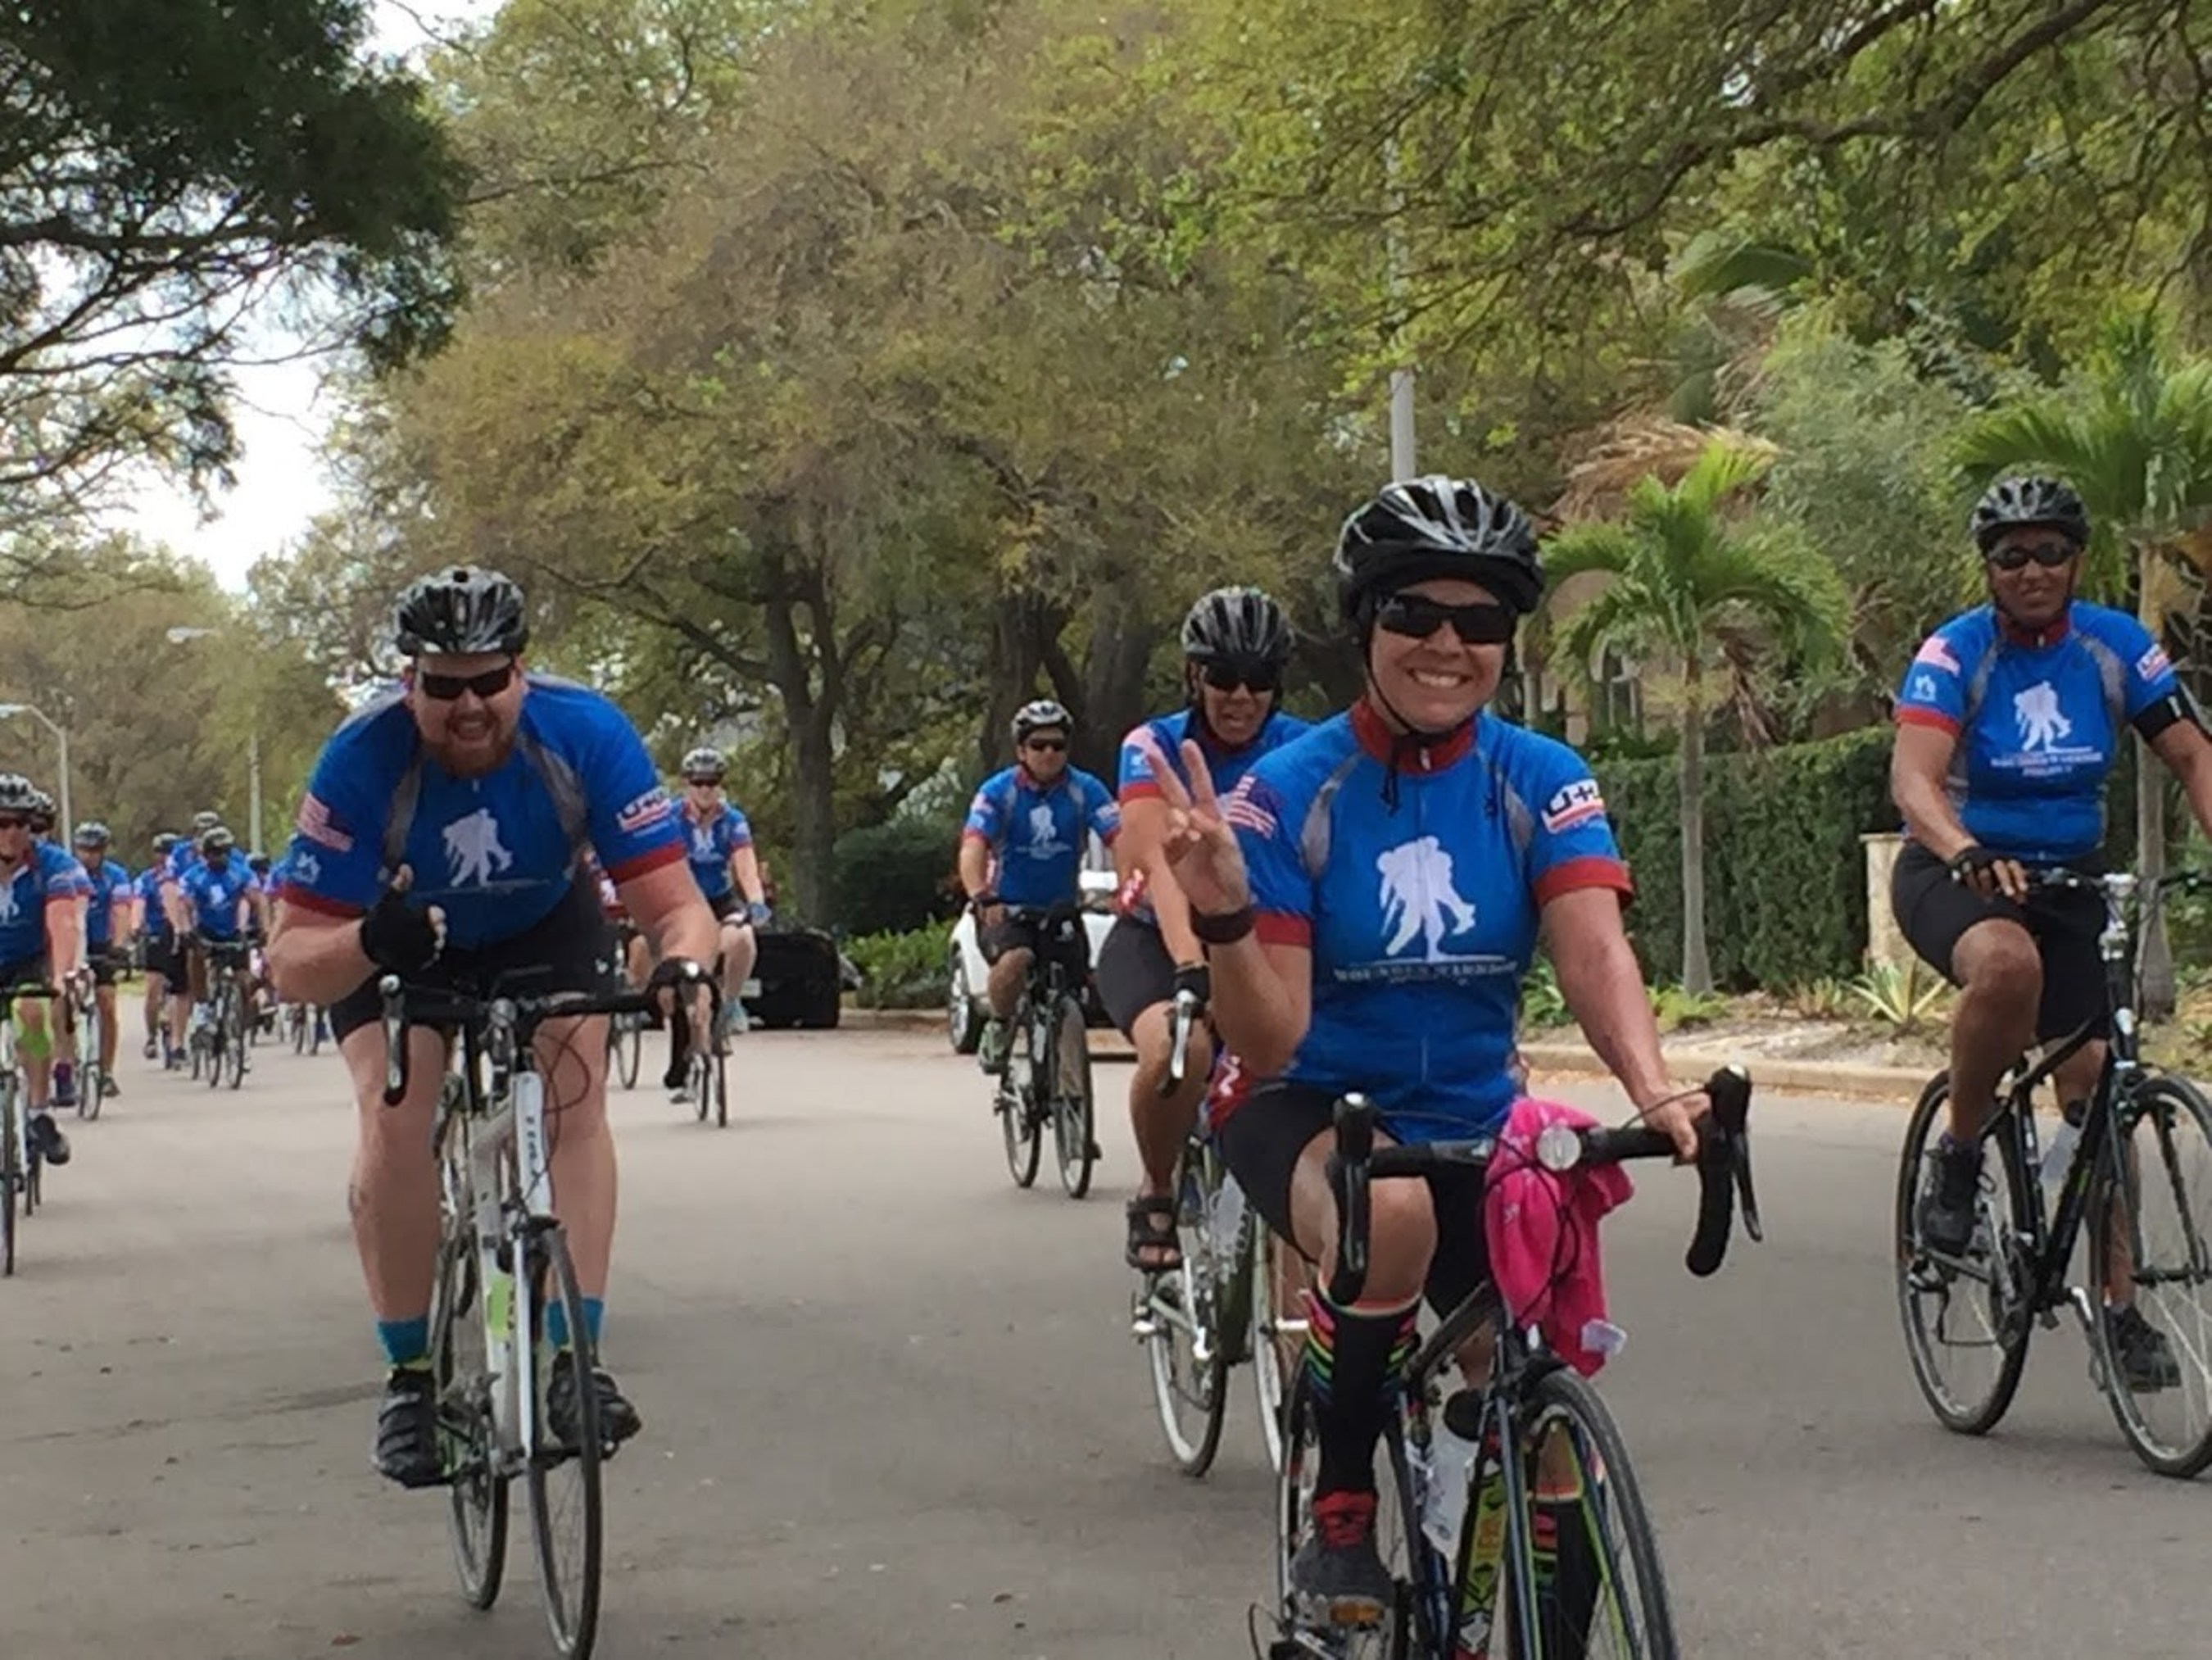 Wounded Warrior Project Alumni taking part in a Soldier Ride event.